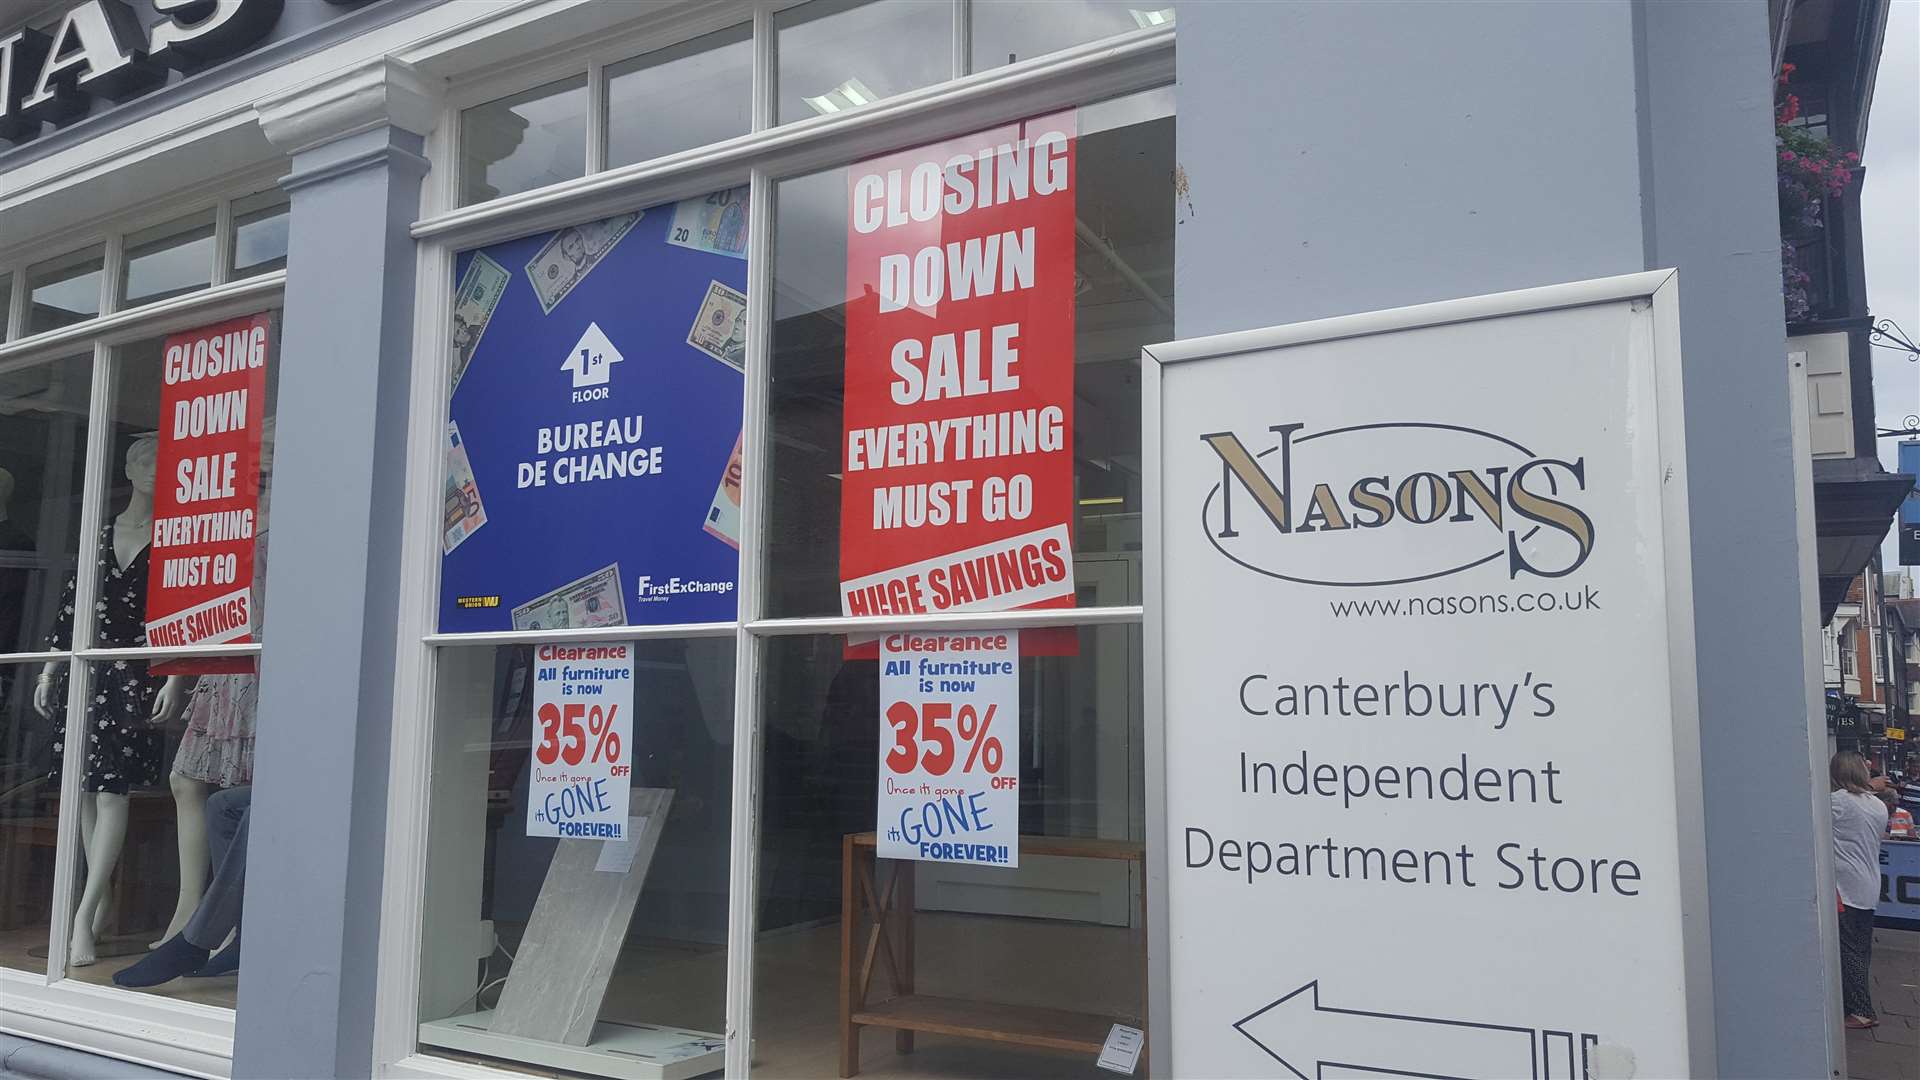 Nasons closing down sale started this week